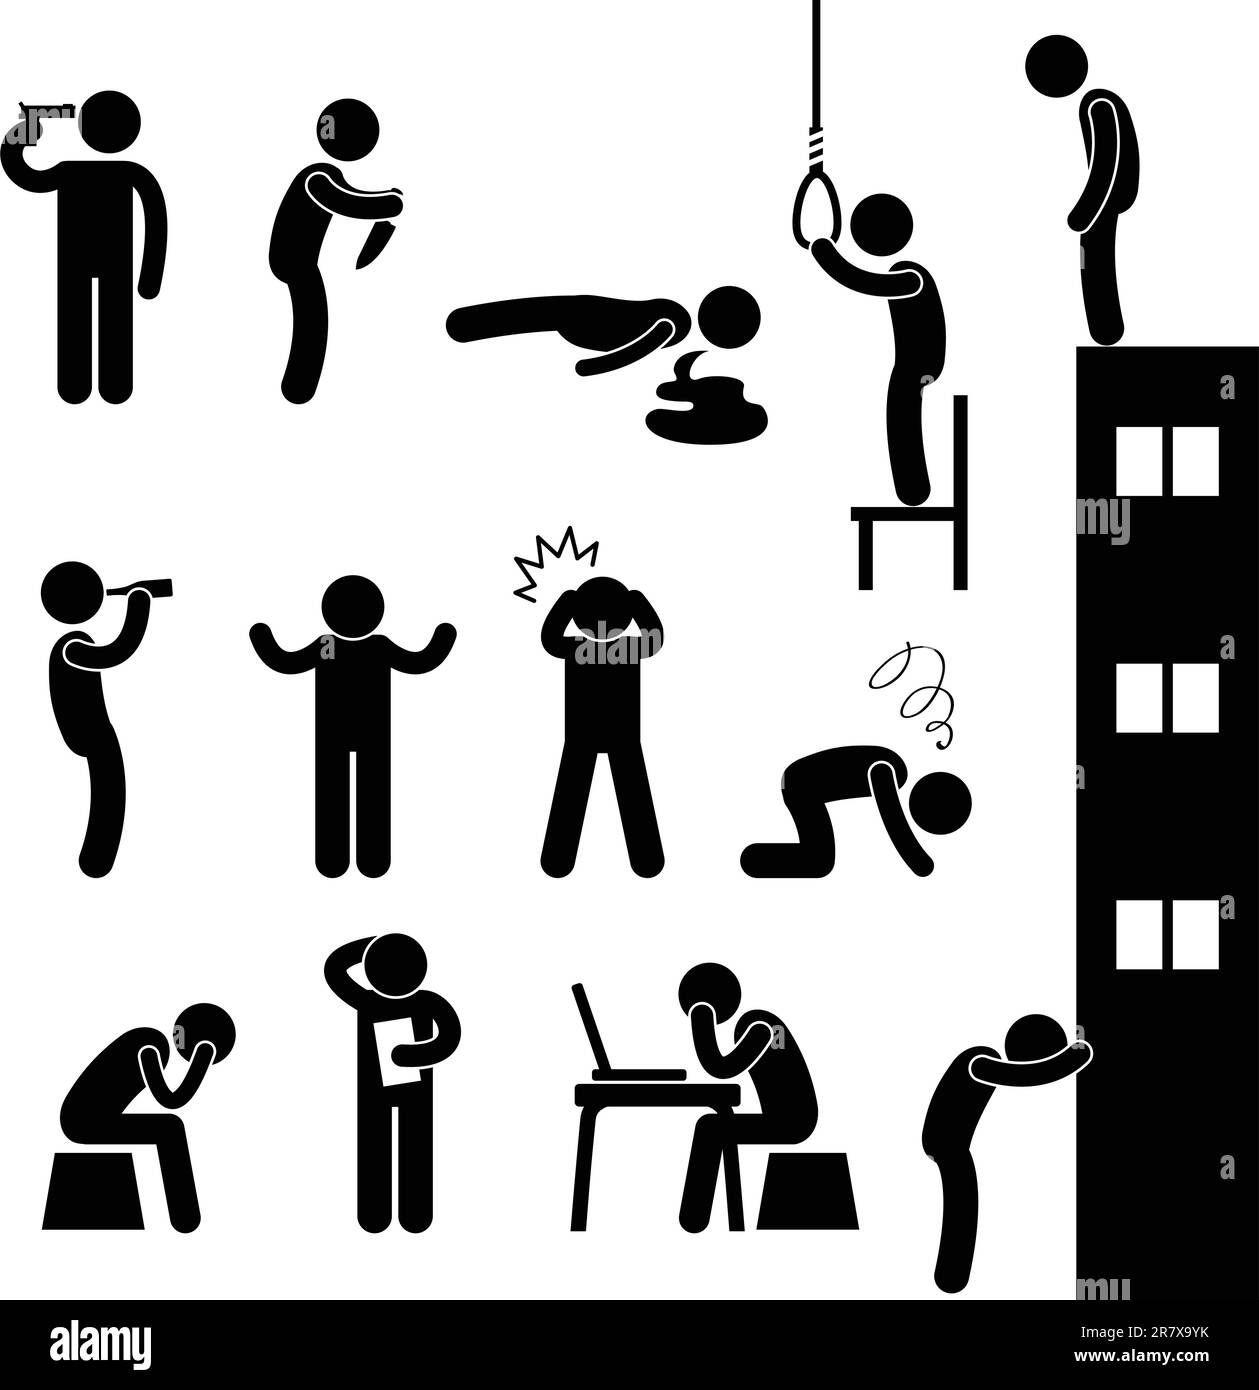 A set of human figure showing desperation and suicidal attempt. Stock Vector